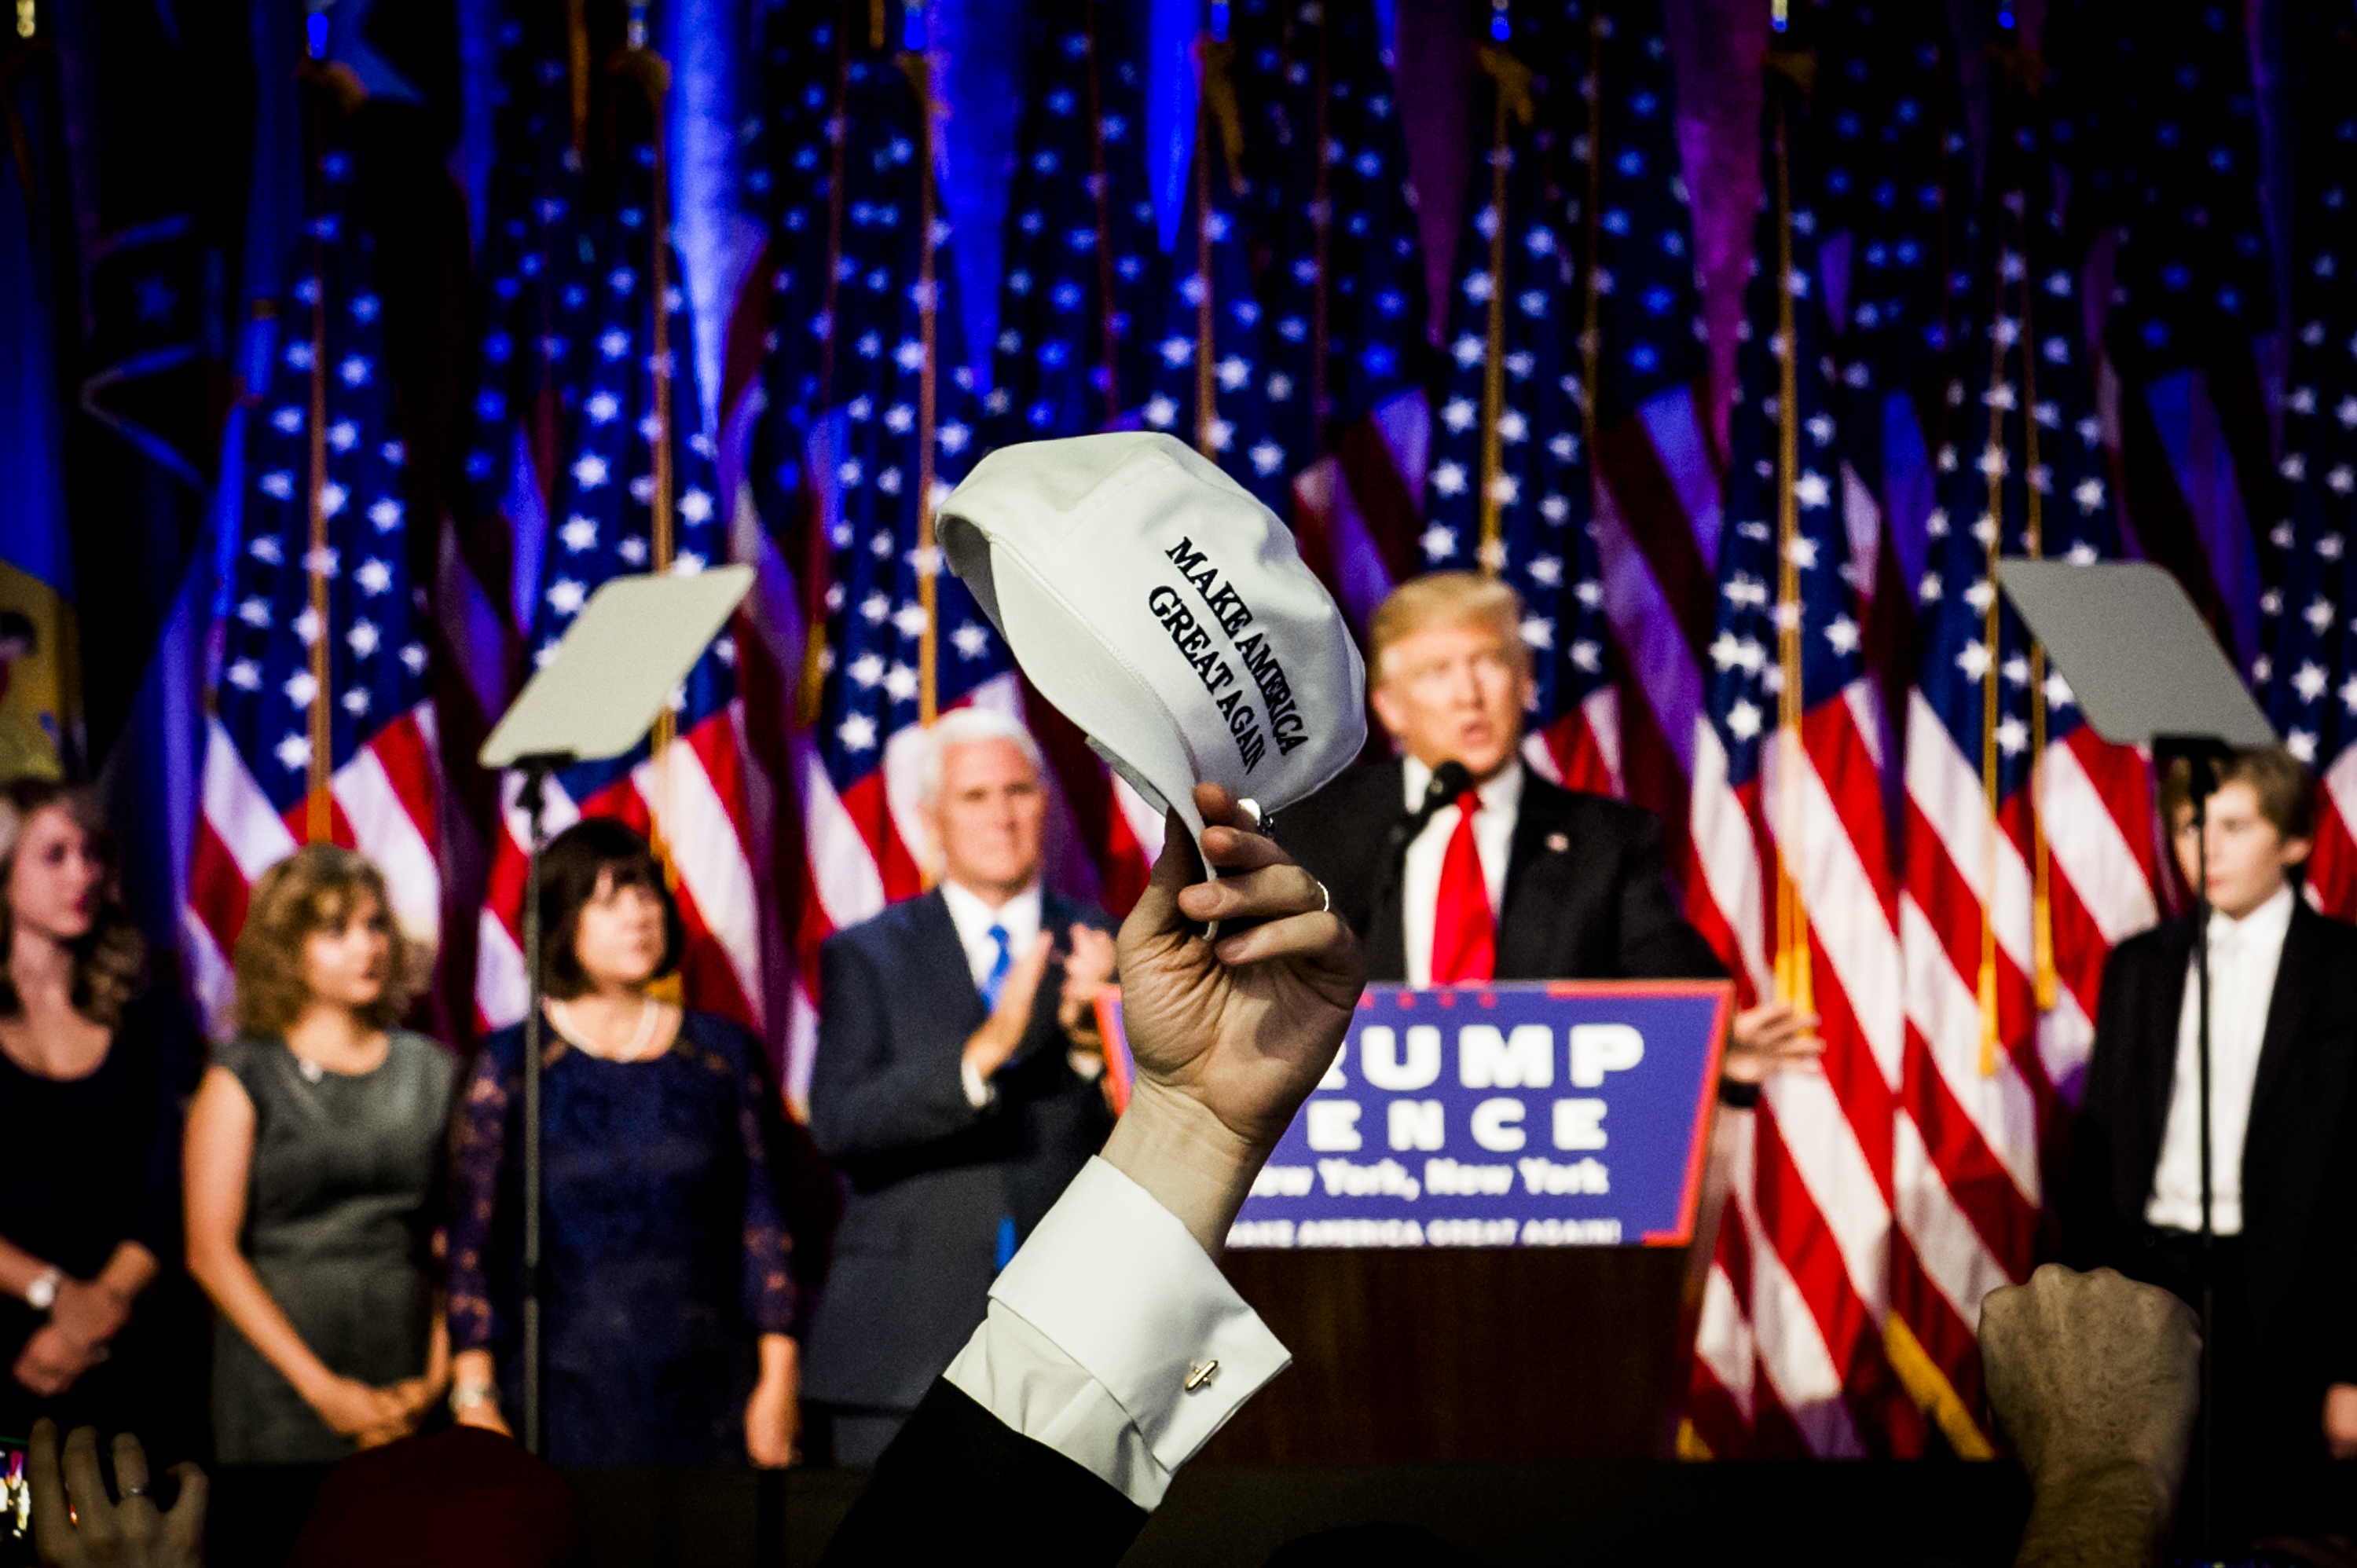 Scenes from President-elect Donald Trump's Victory Party on Tuesday, Nov. 8, 2016 in New York's Manhattan borough.